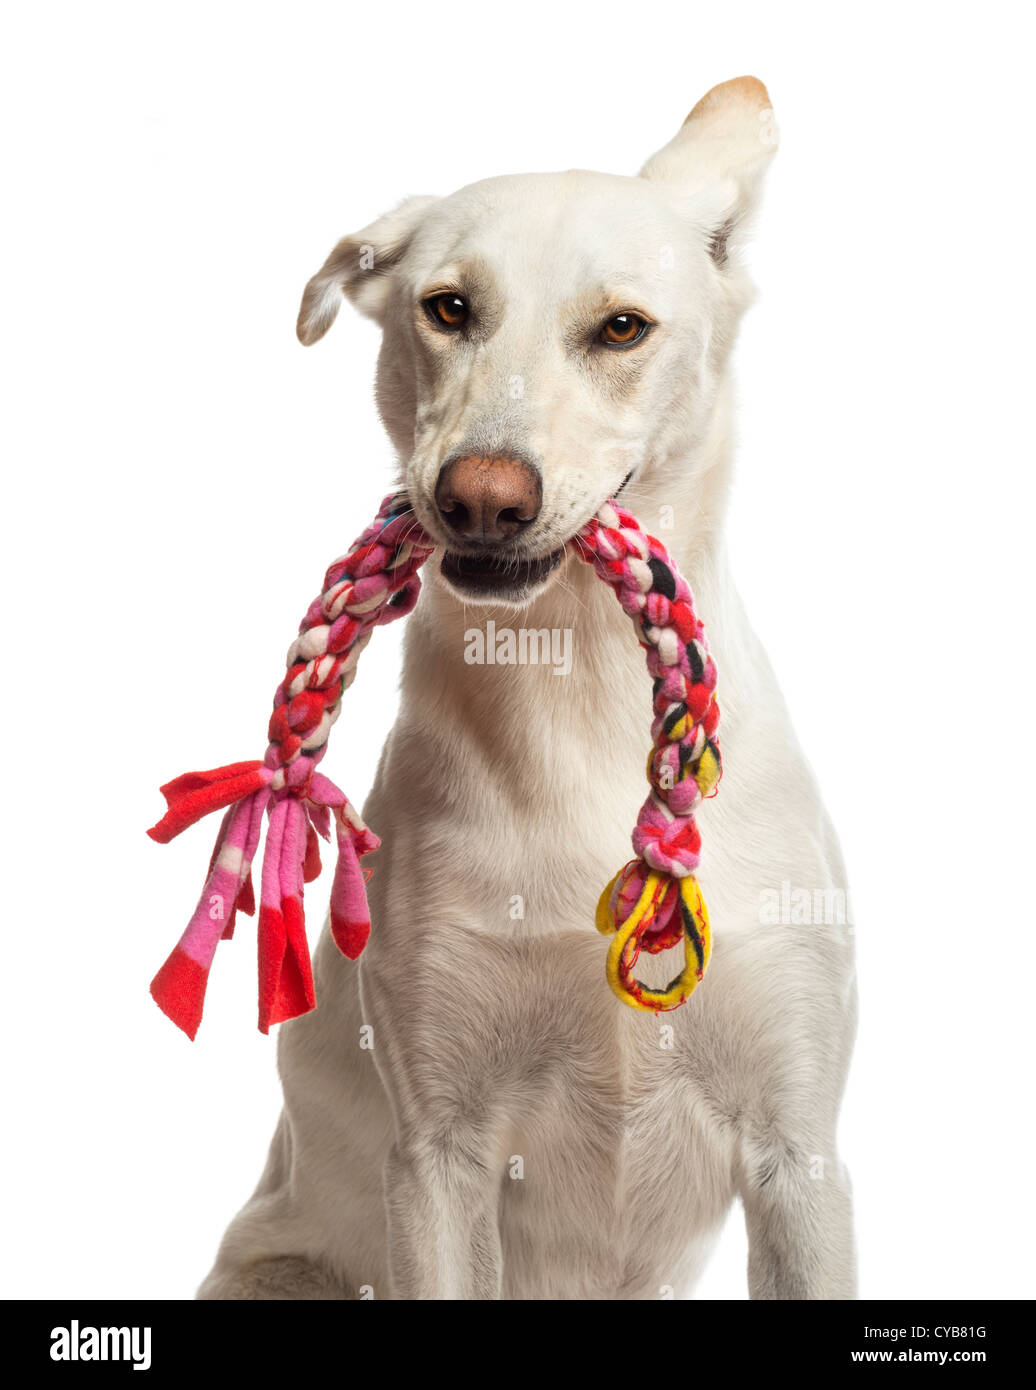 Crossbreed dog holding a toy in its mouth looking at the camera against white background Stock Photo